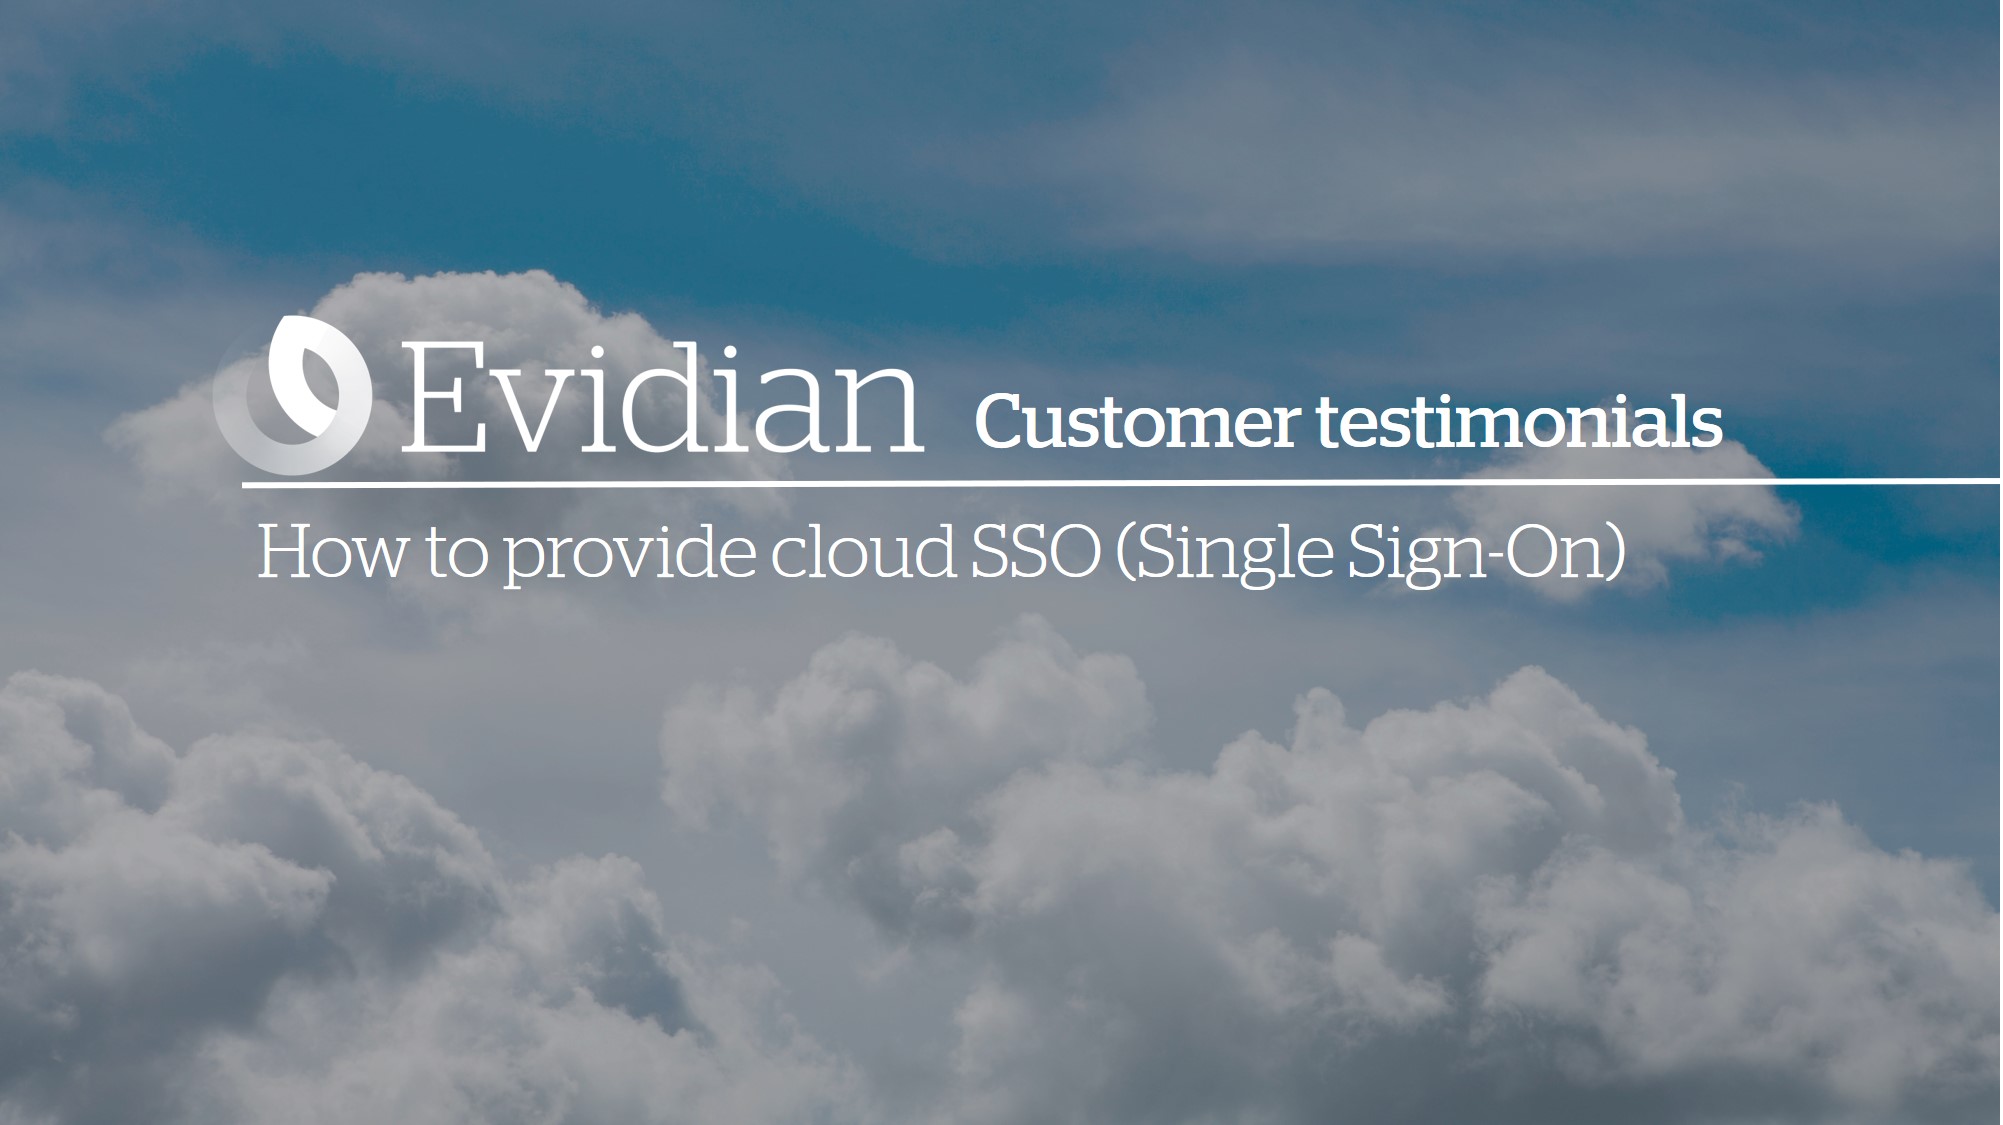 How does Evidian provide SSO (Single Sign-On) with virtual desktops at P&T Luxemburg?